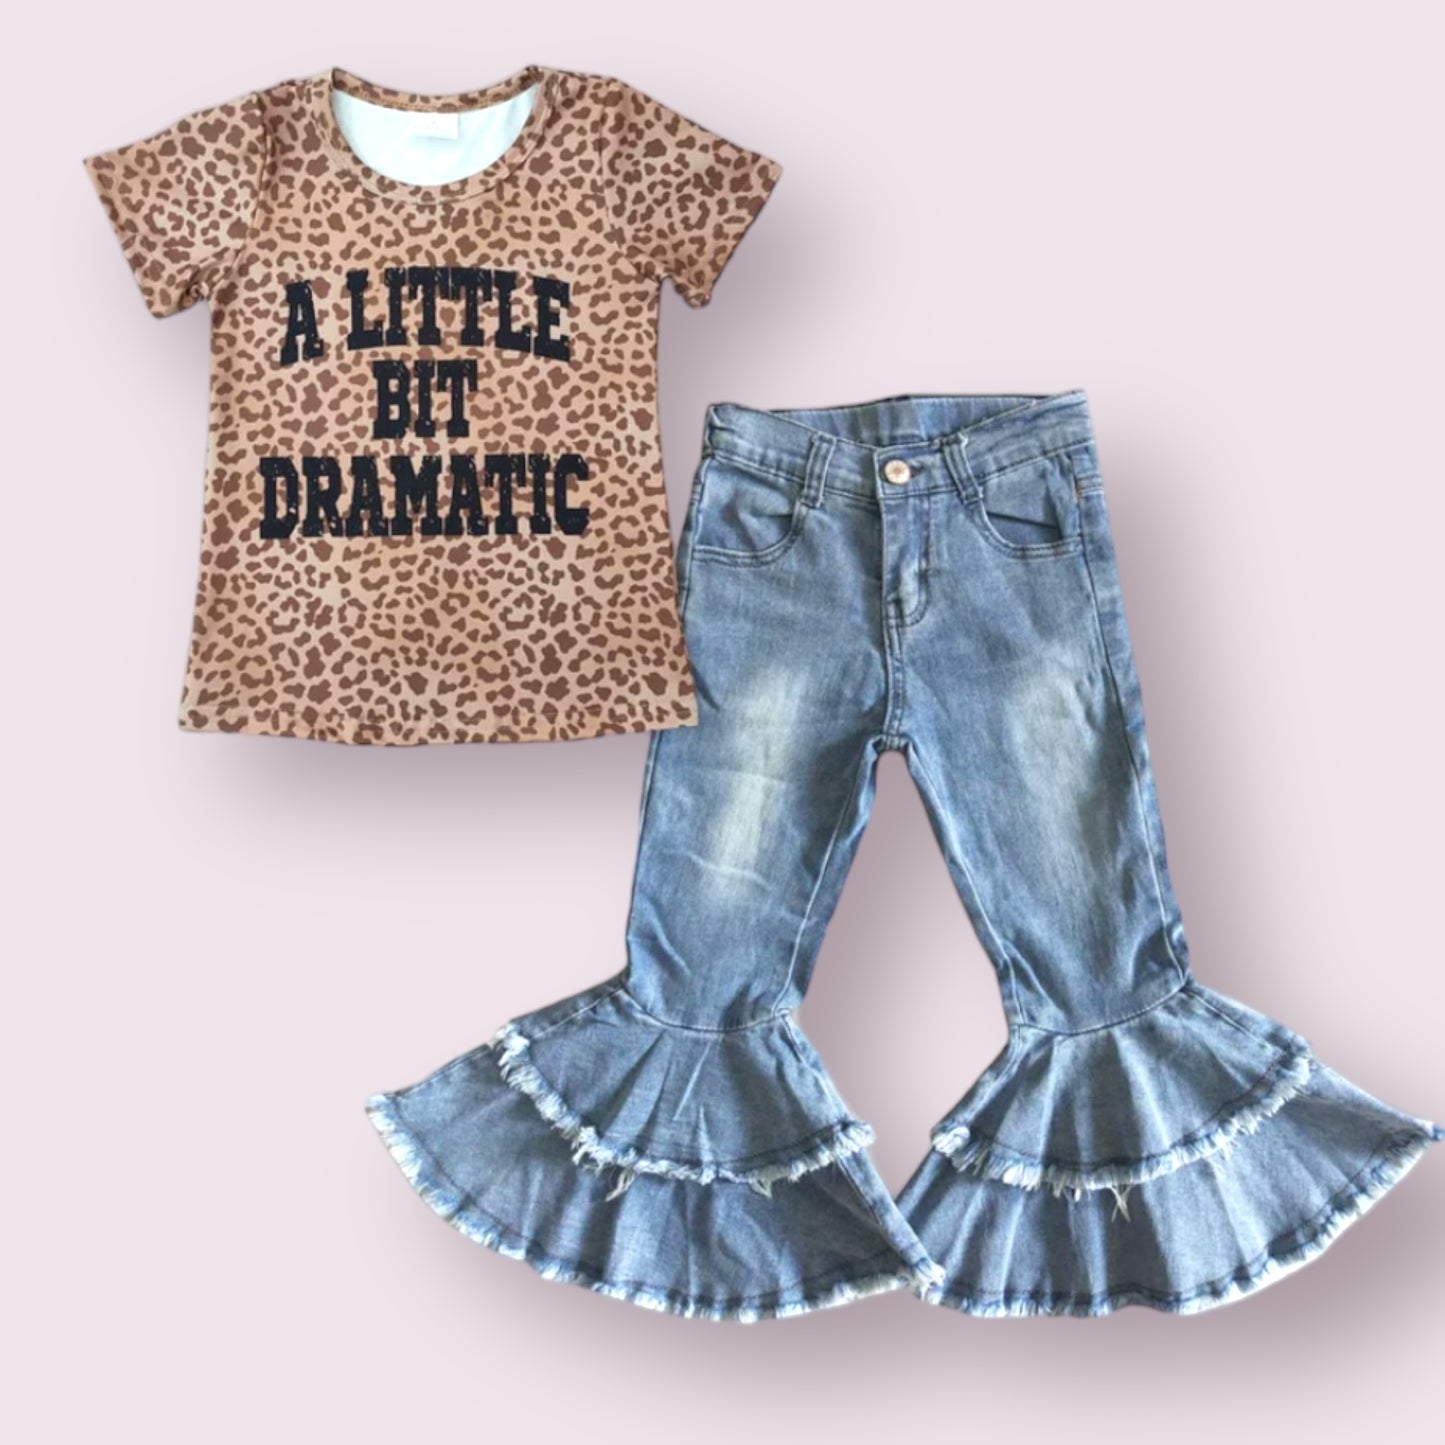 Little Bit Dramatic Top and Jeans